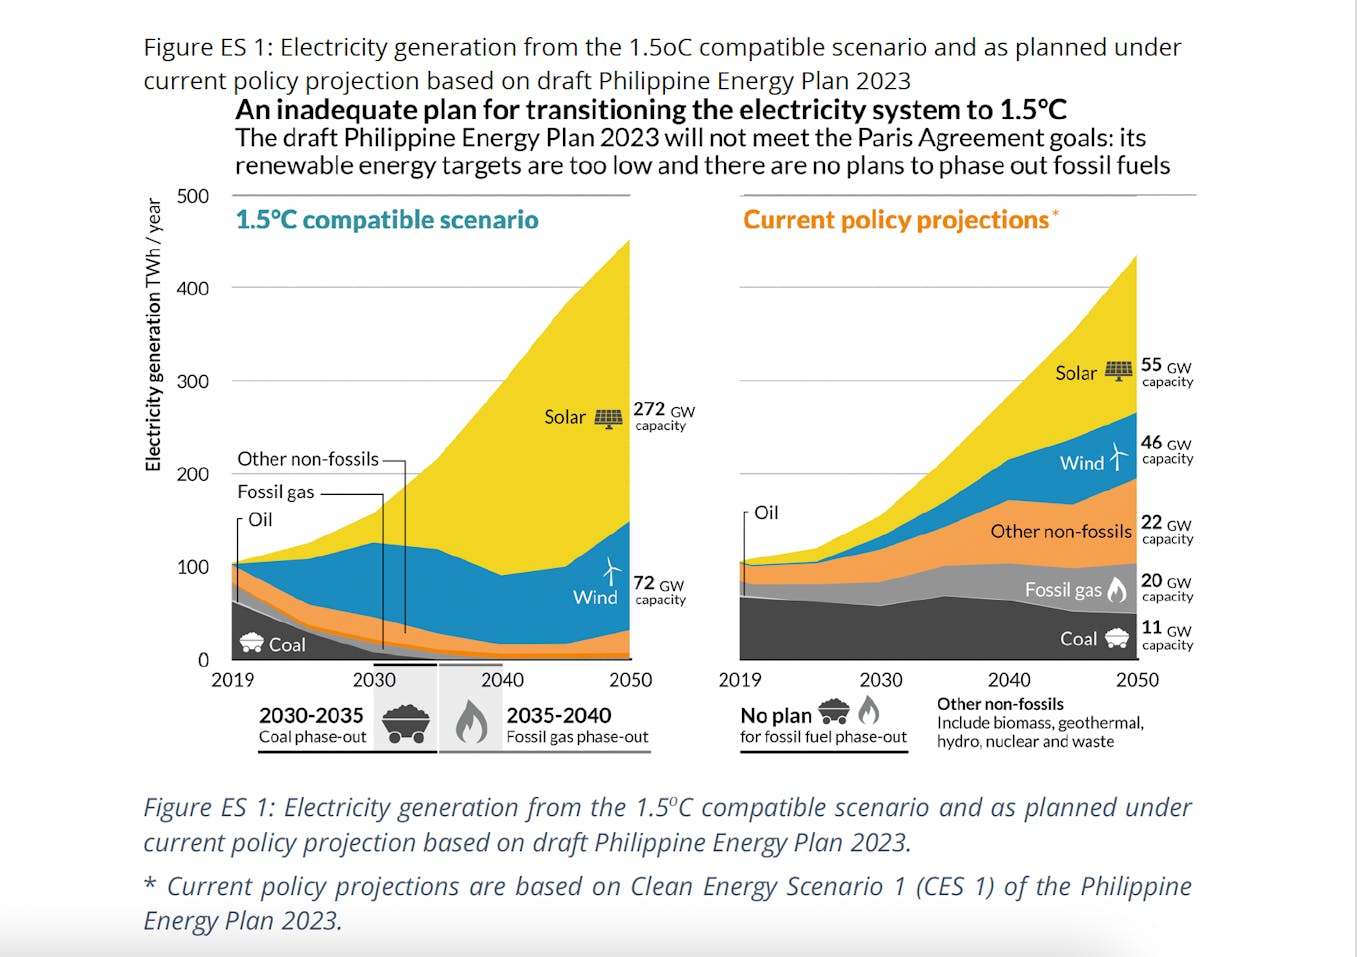 The Philippines power sector aligned with a 1.5C emissions pathway